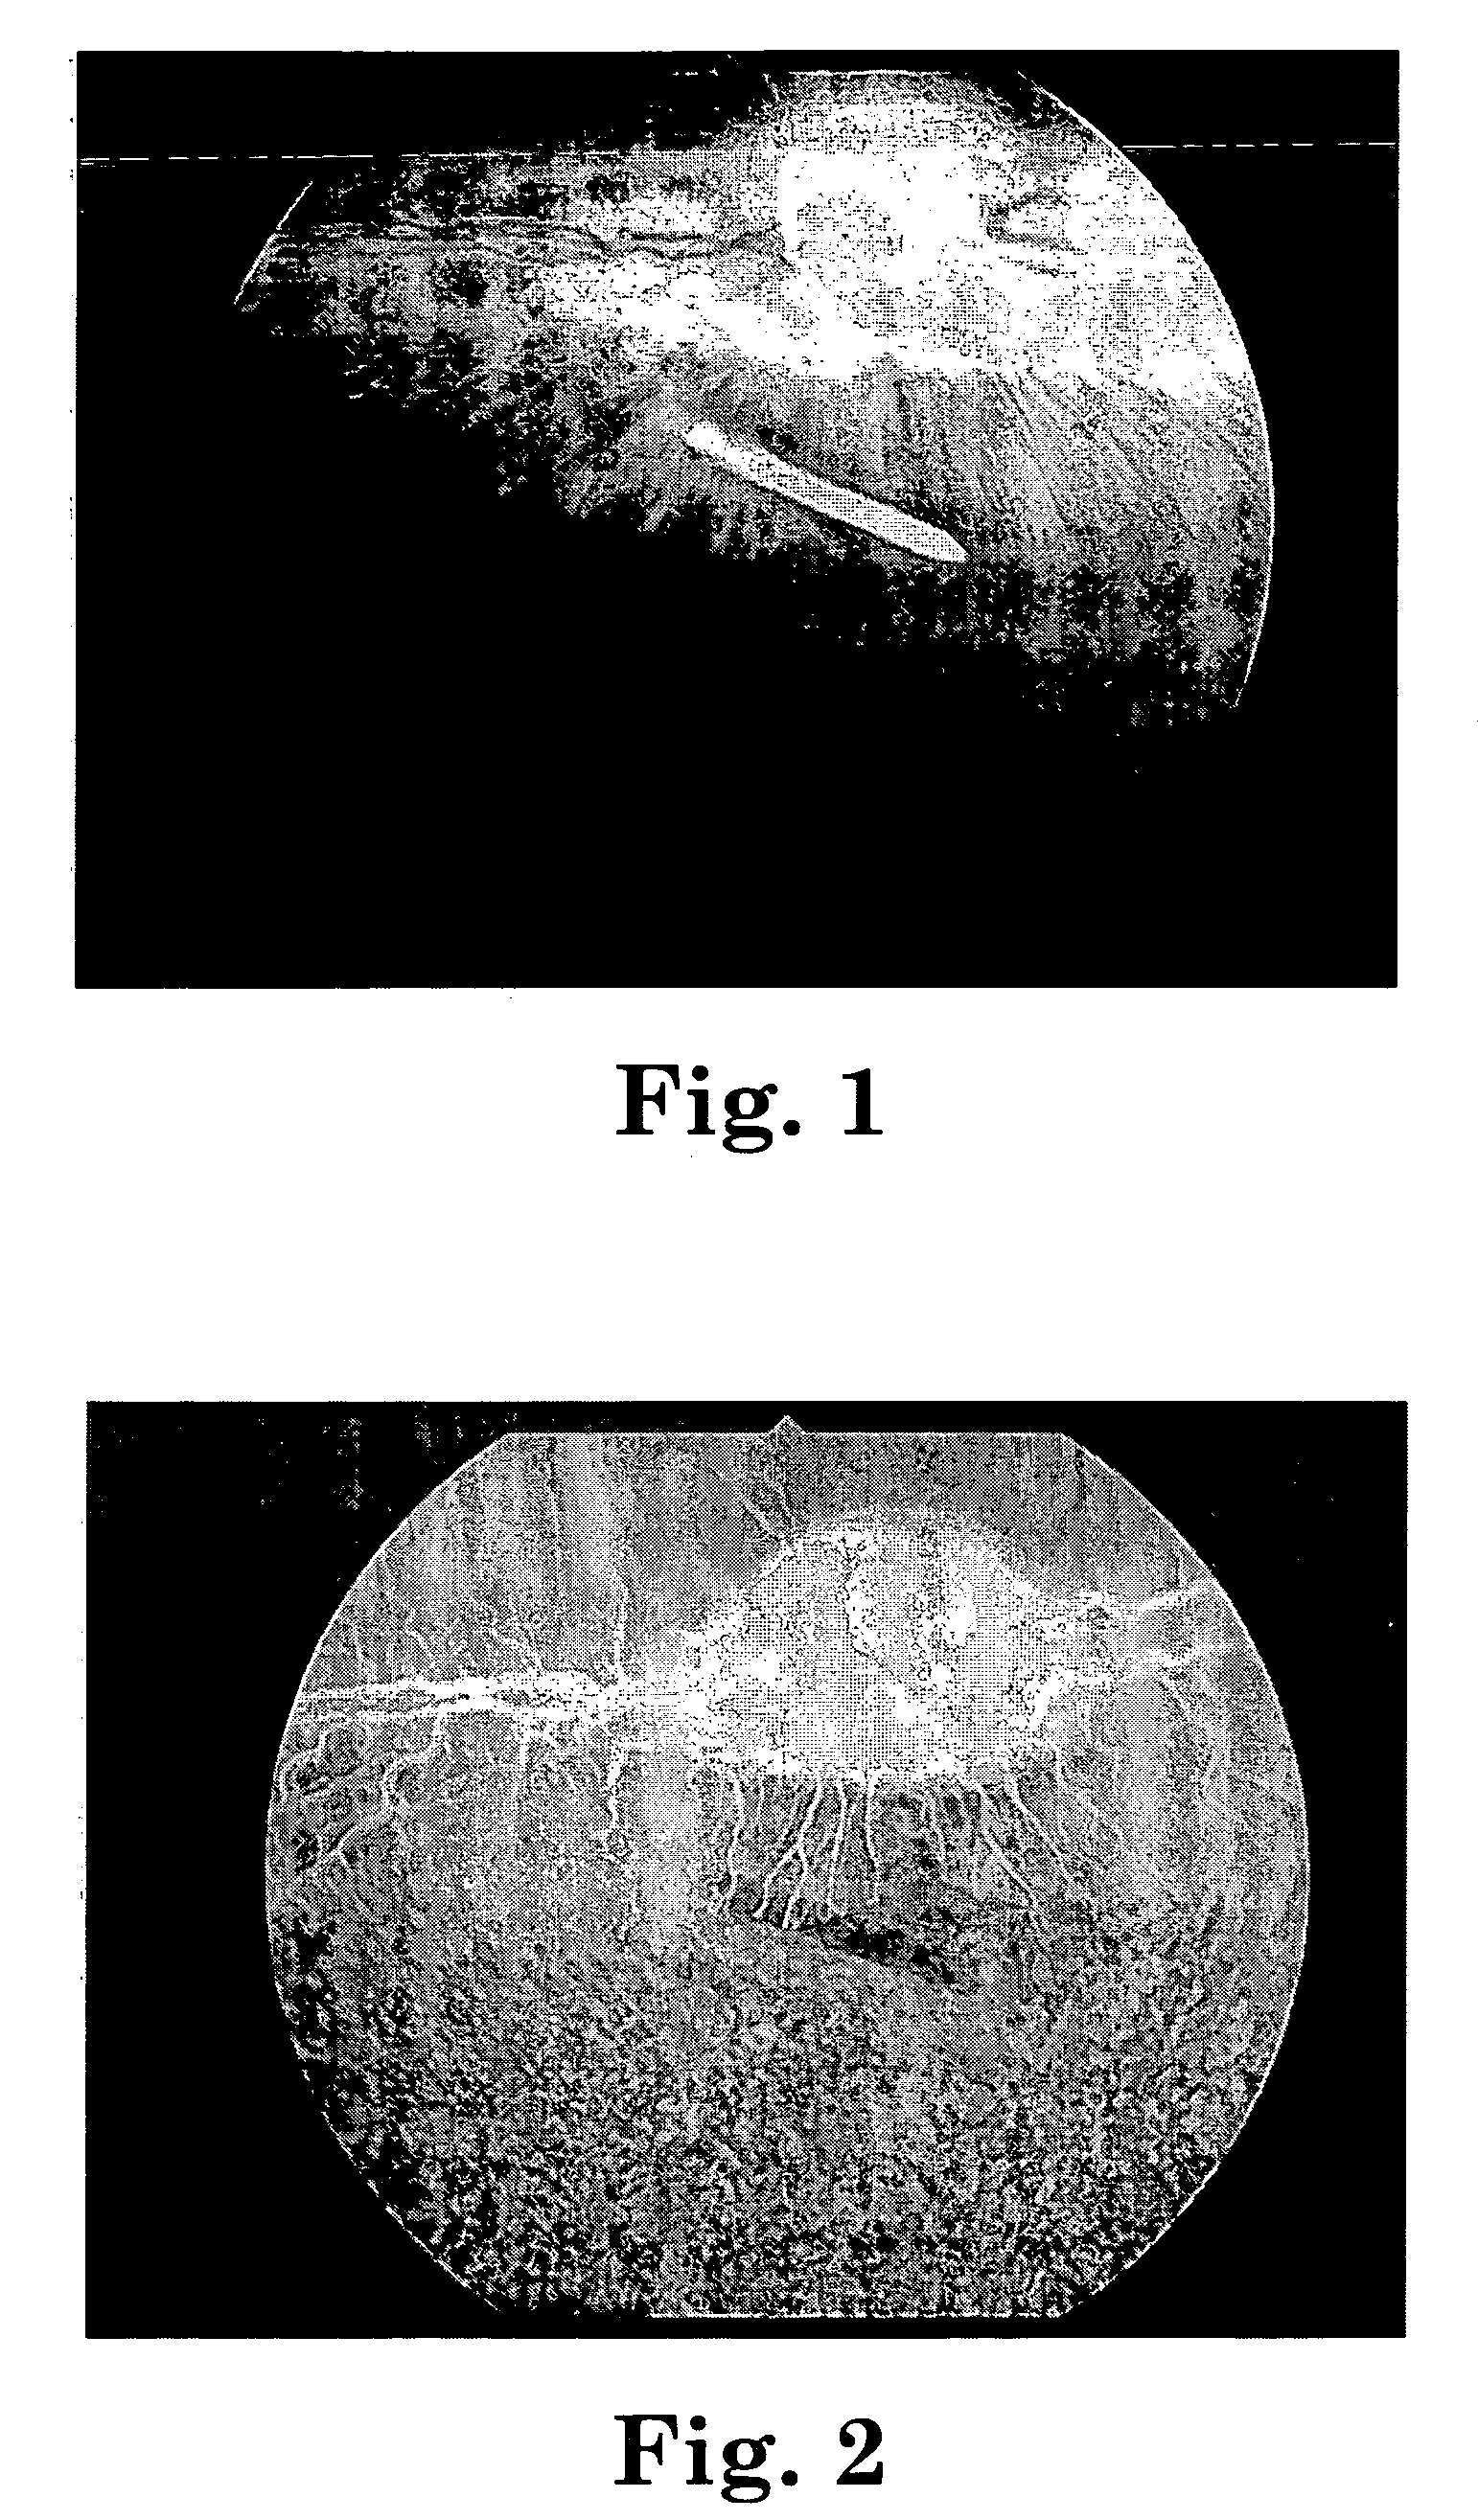 Sustained release implants and methods for subretinal delivery of bioactive agents to treat or prevent retinal disease